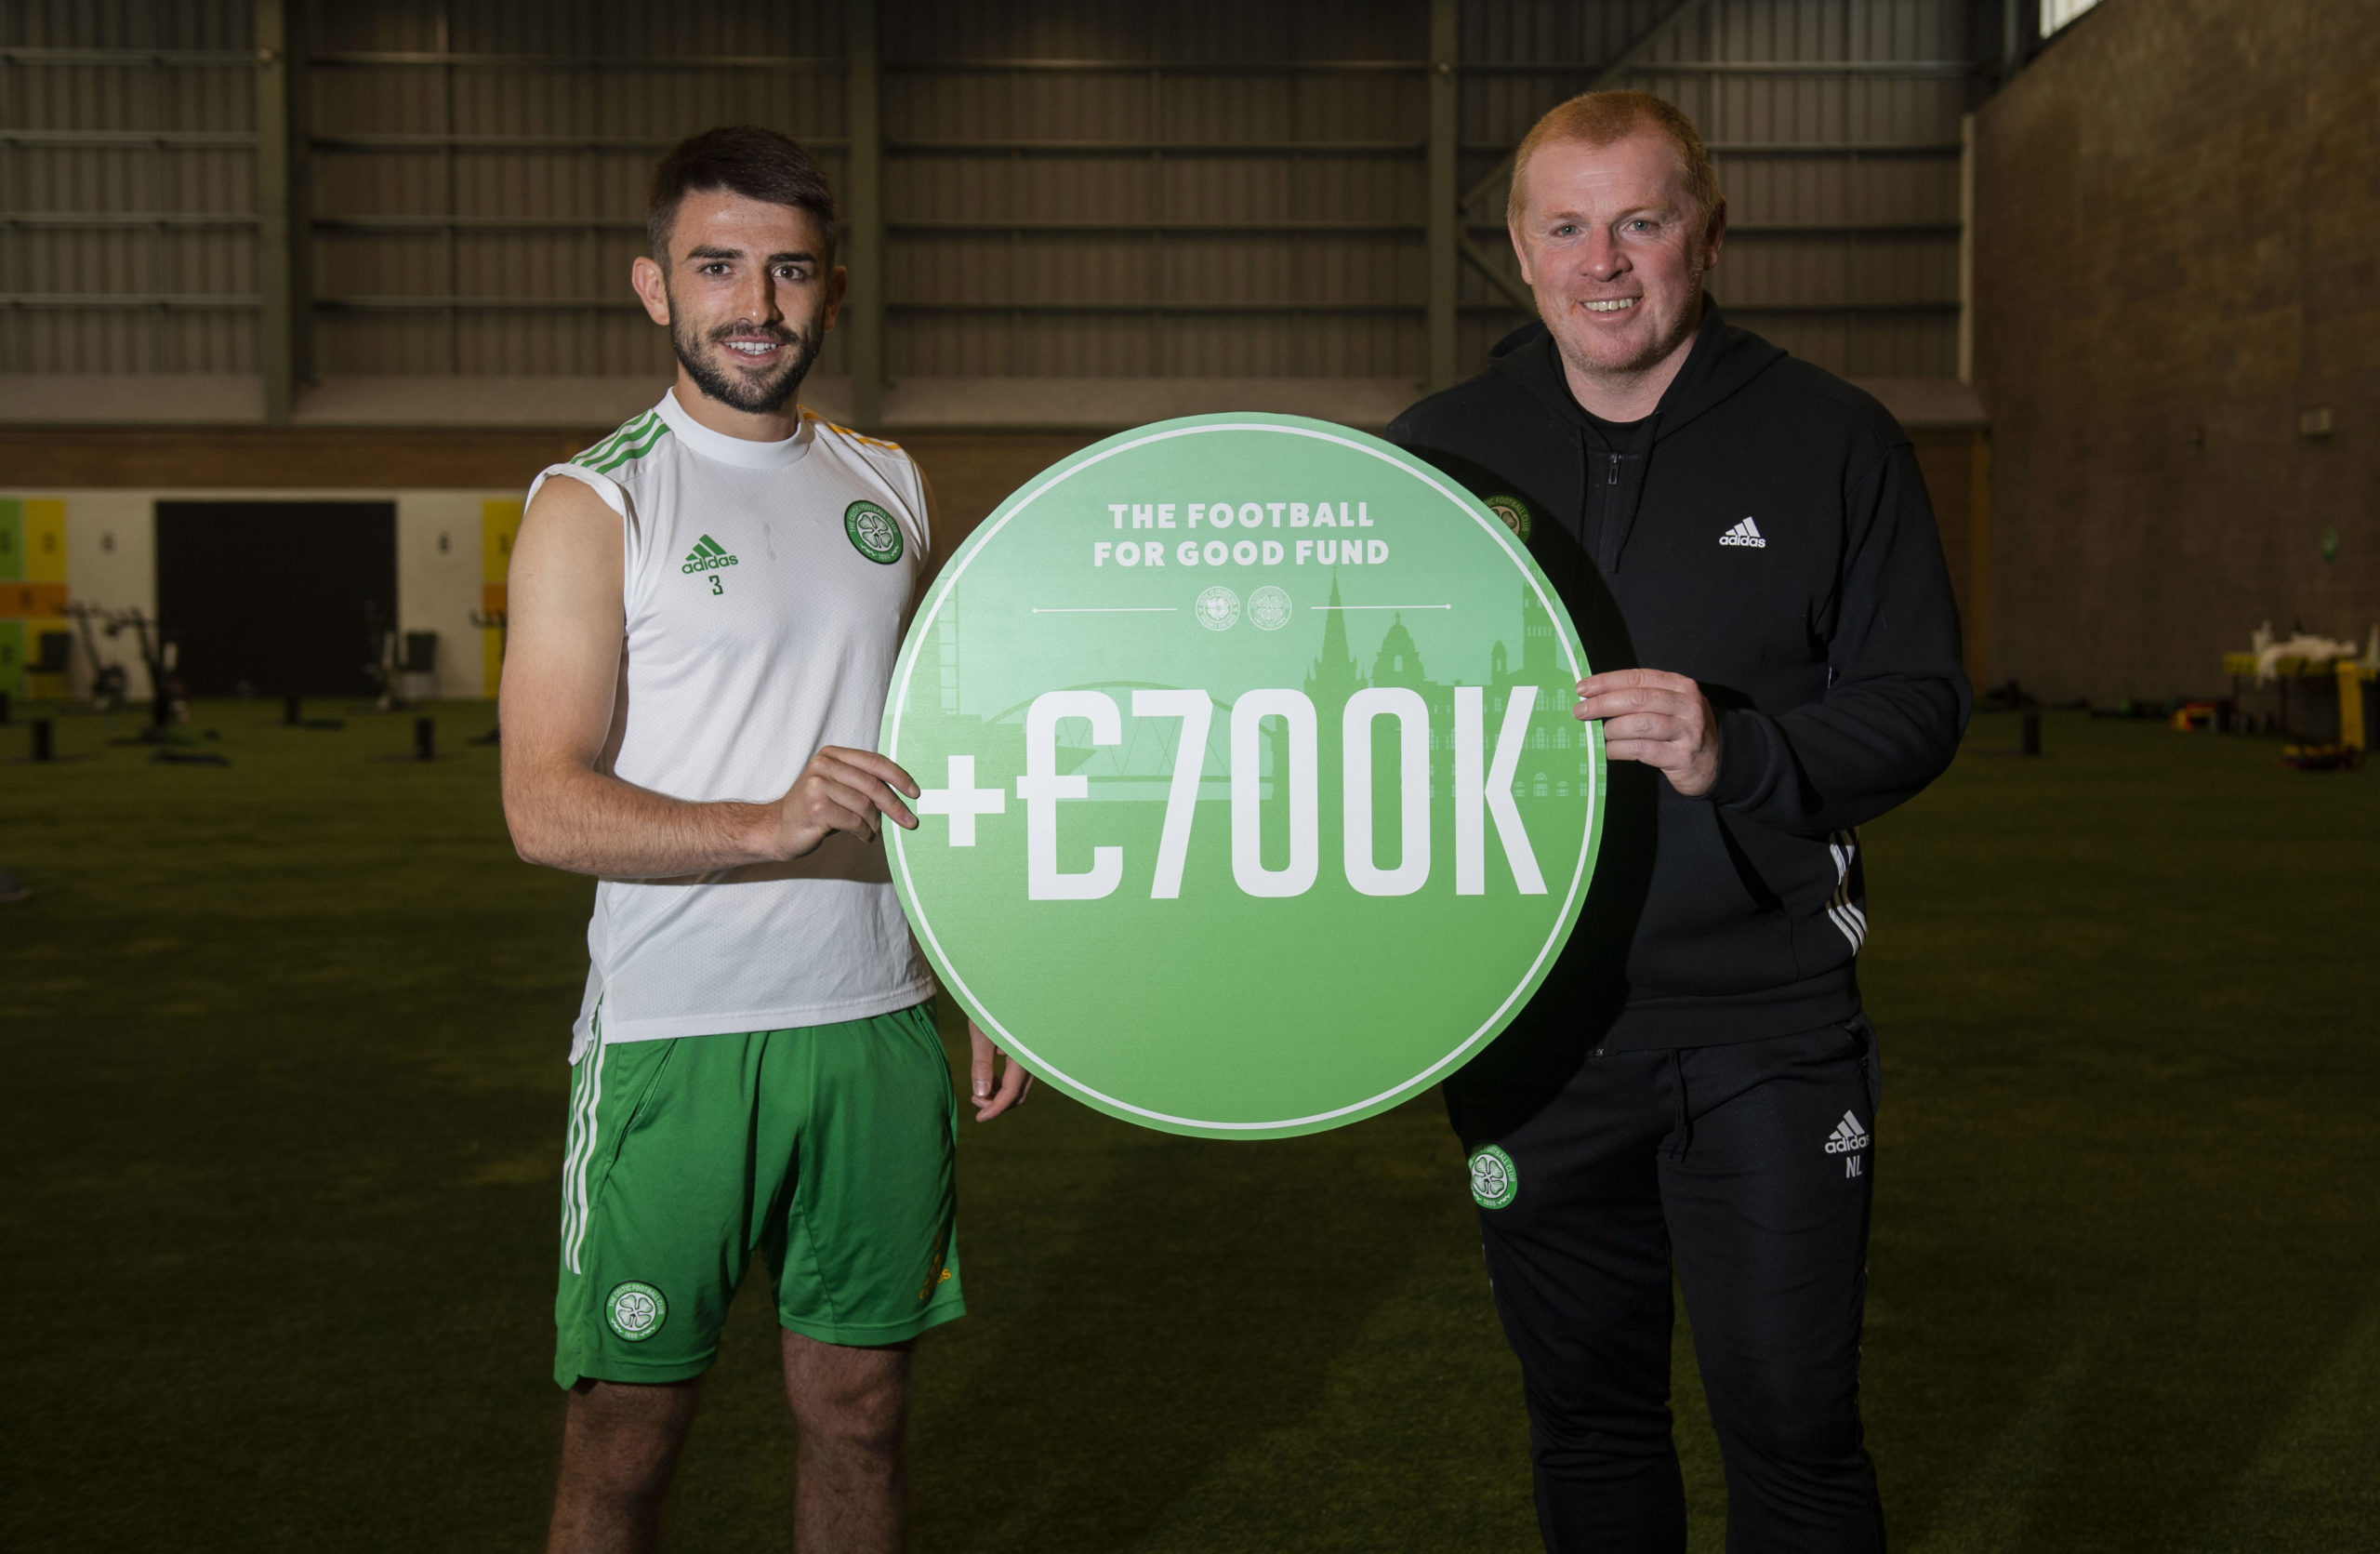 Celtic's Football for Good fund is growing